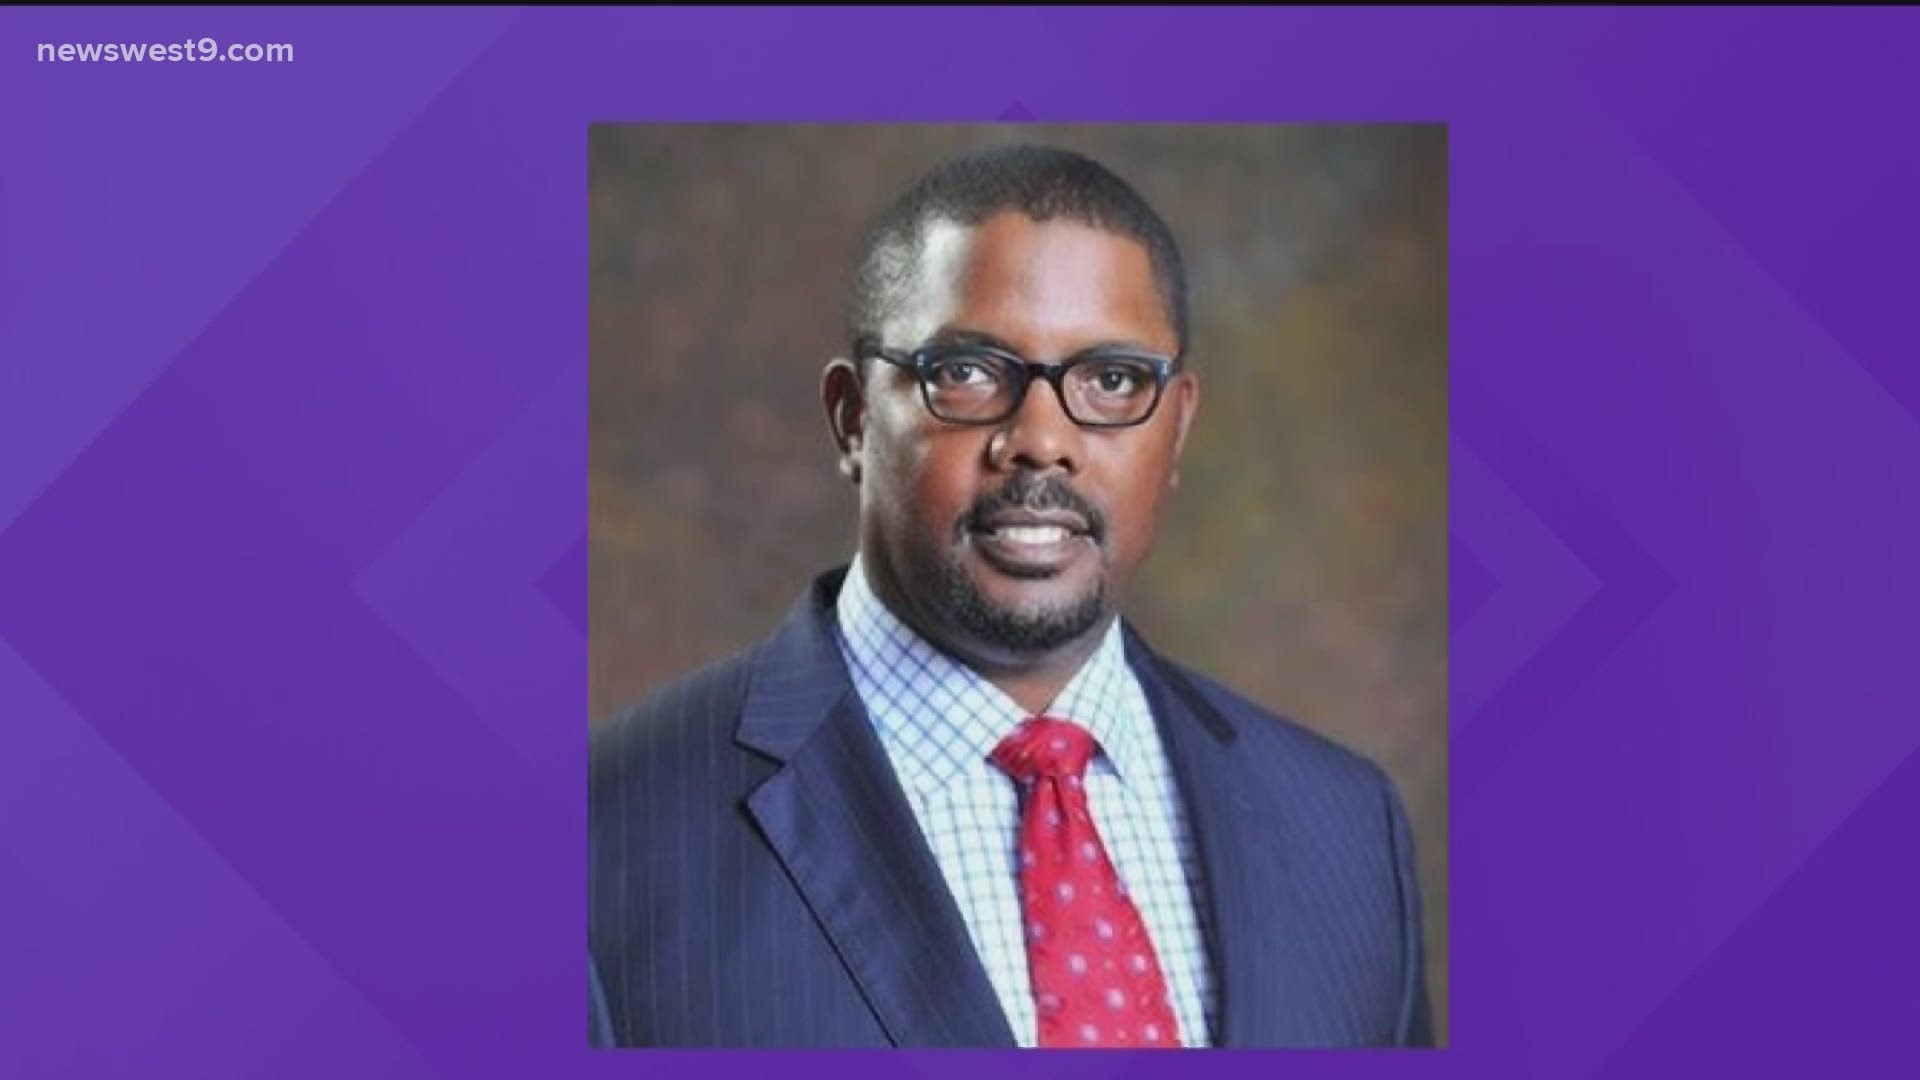 As the school board now begins their search for an interim superintendent, they appointed Darrell Dodds as acting superintendent.